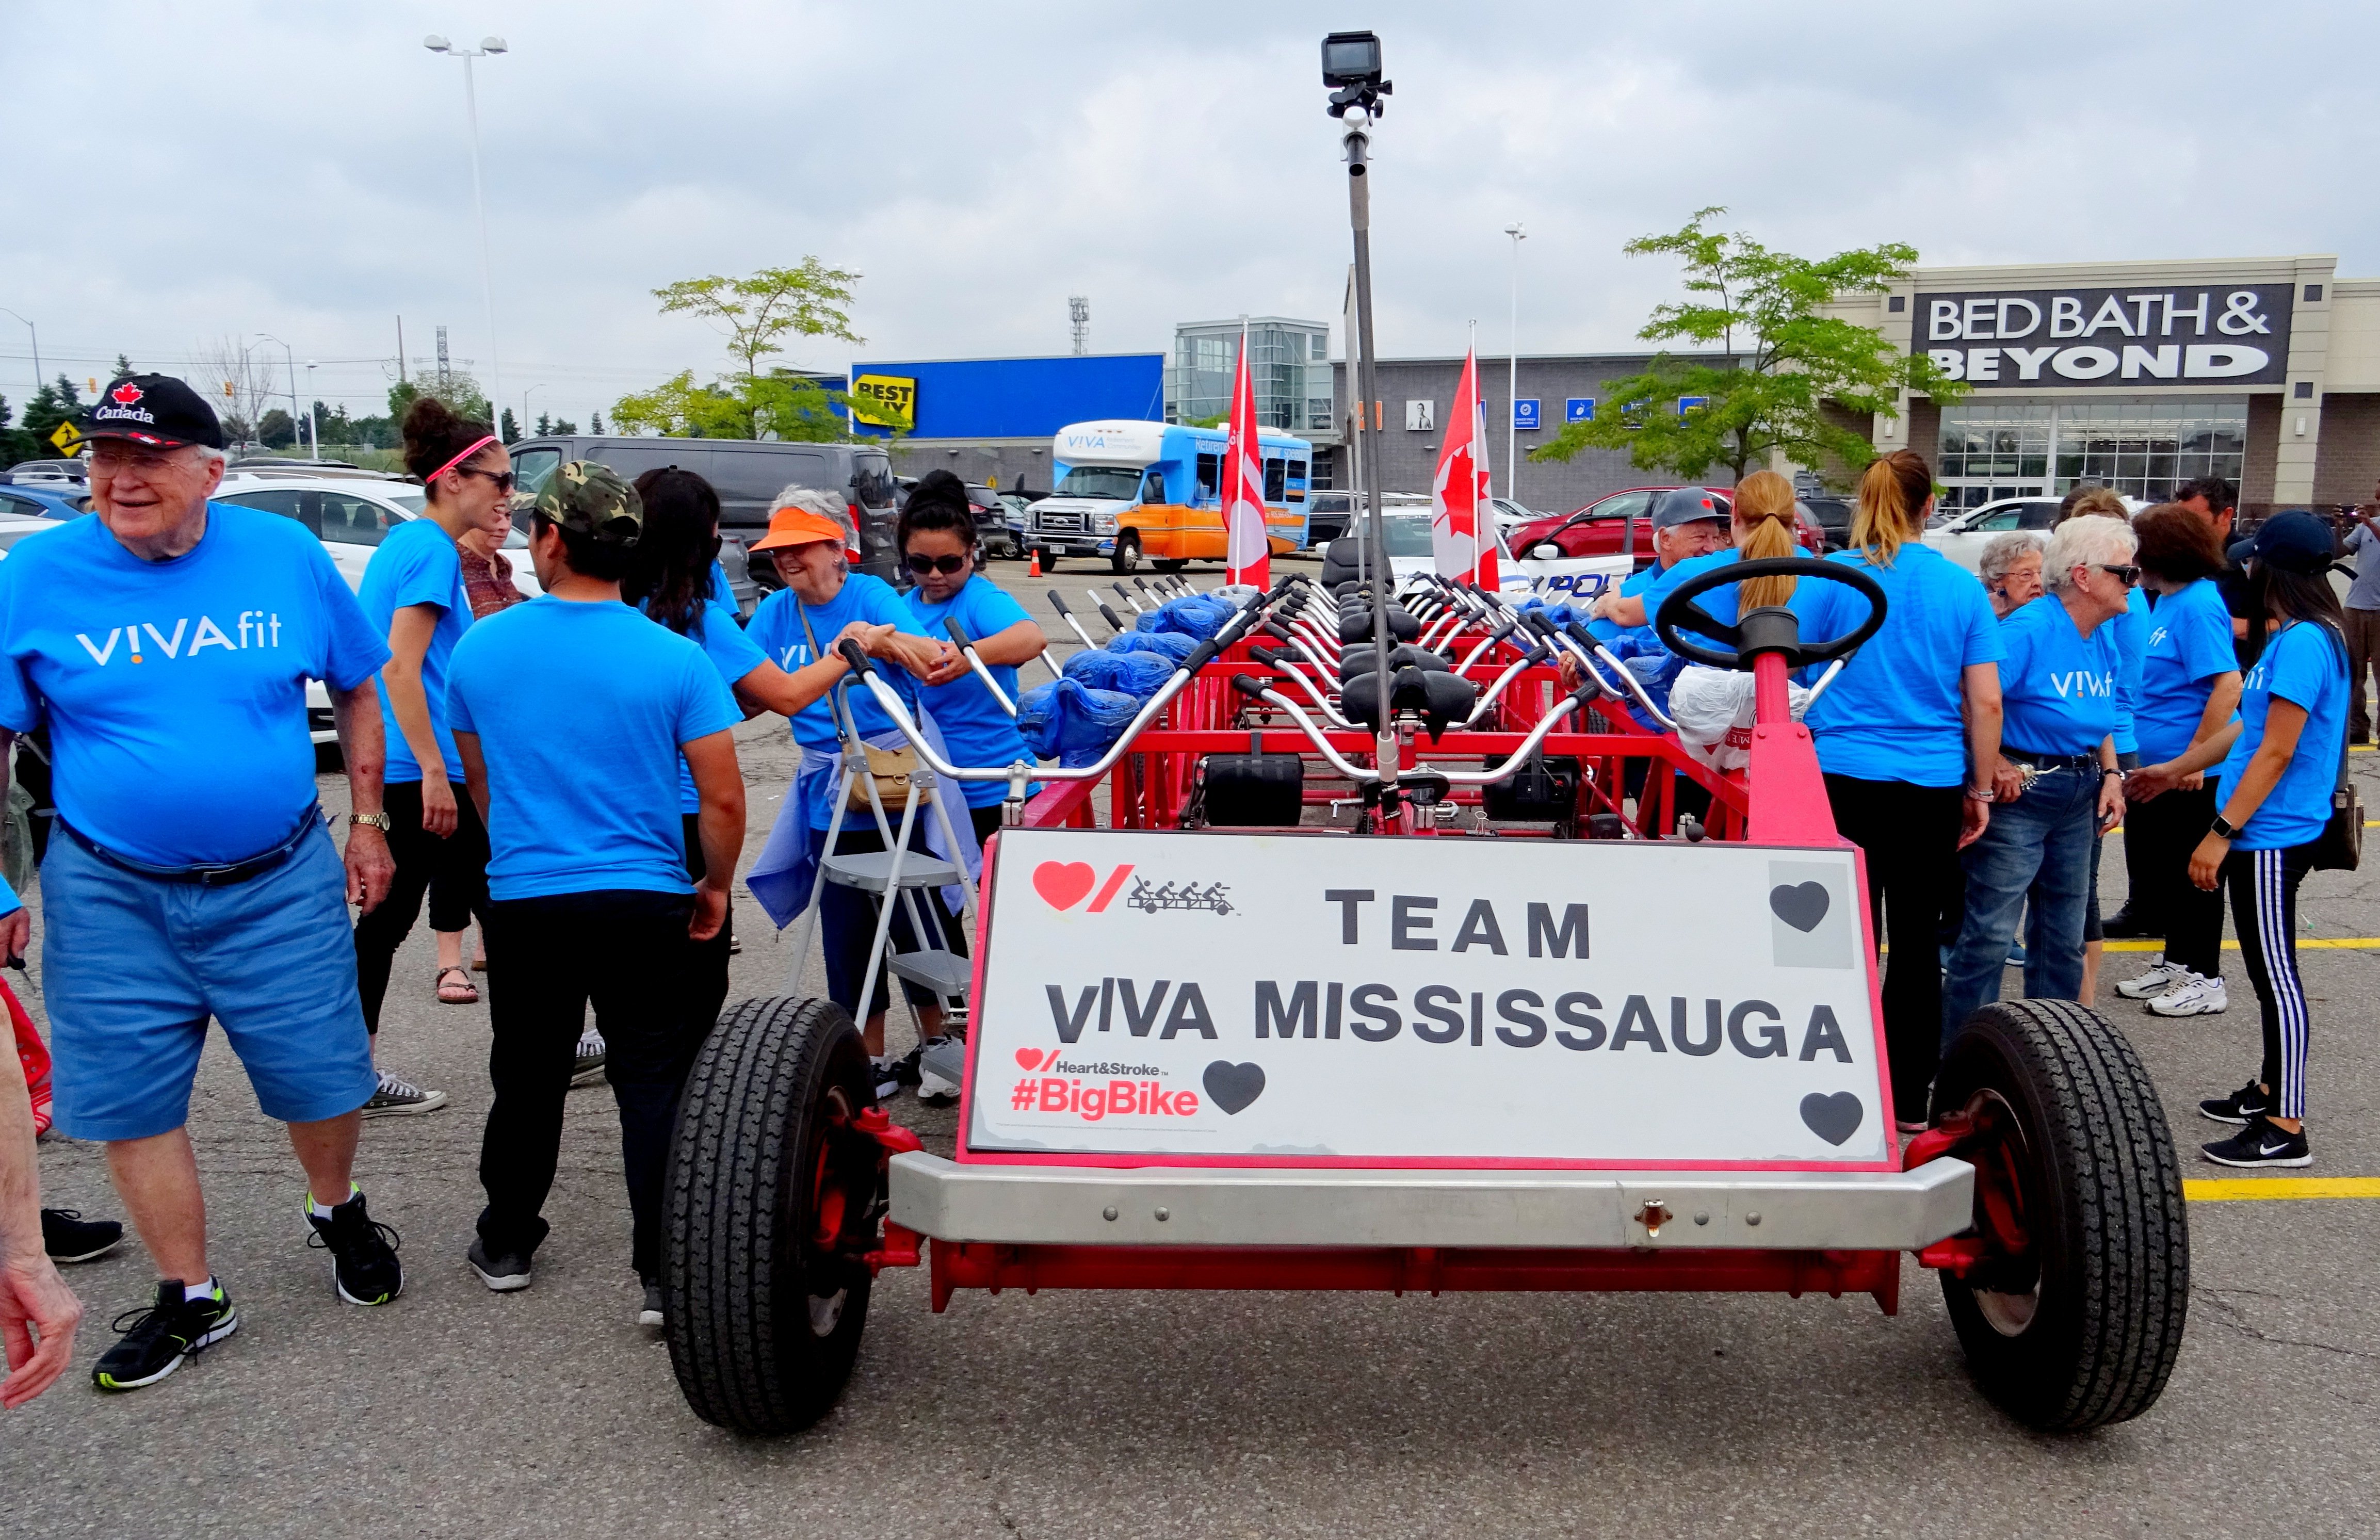 Team VIVA Mississauga at BIG Bike Ride for Heart and Stroke Foundation, Photo by I Lee, 8 Aug. 2018